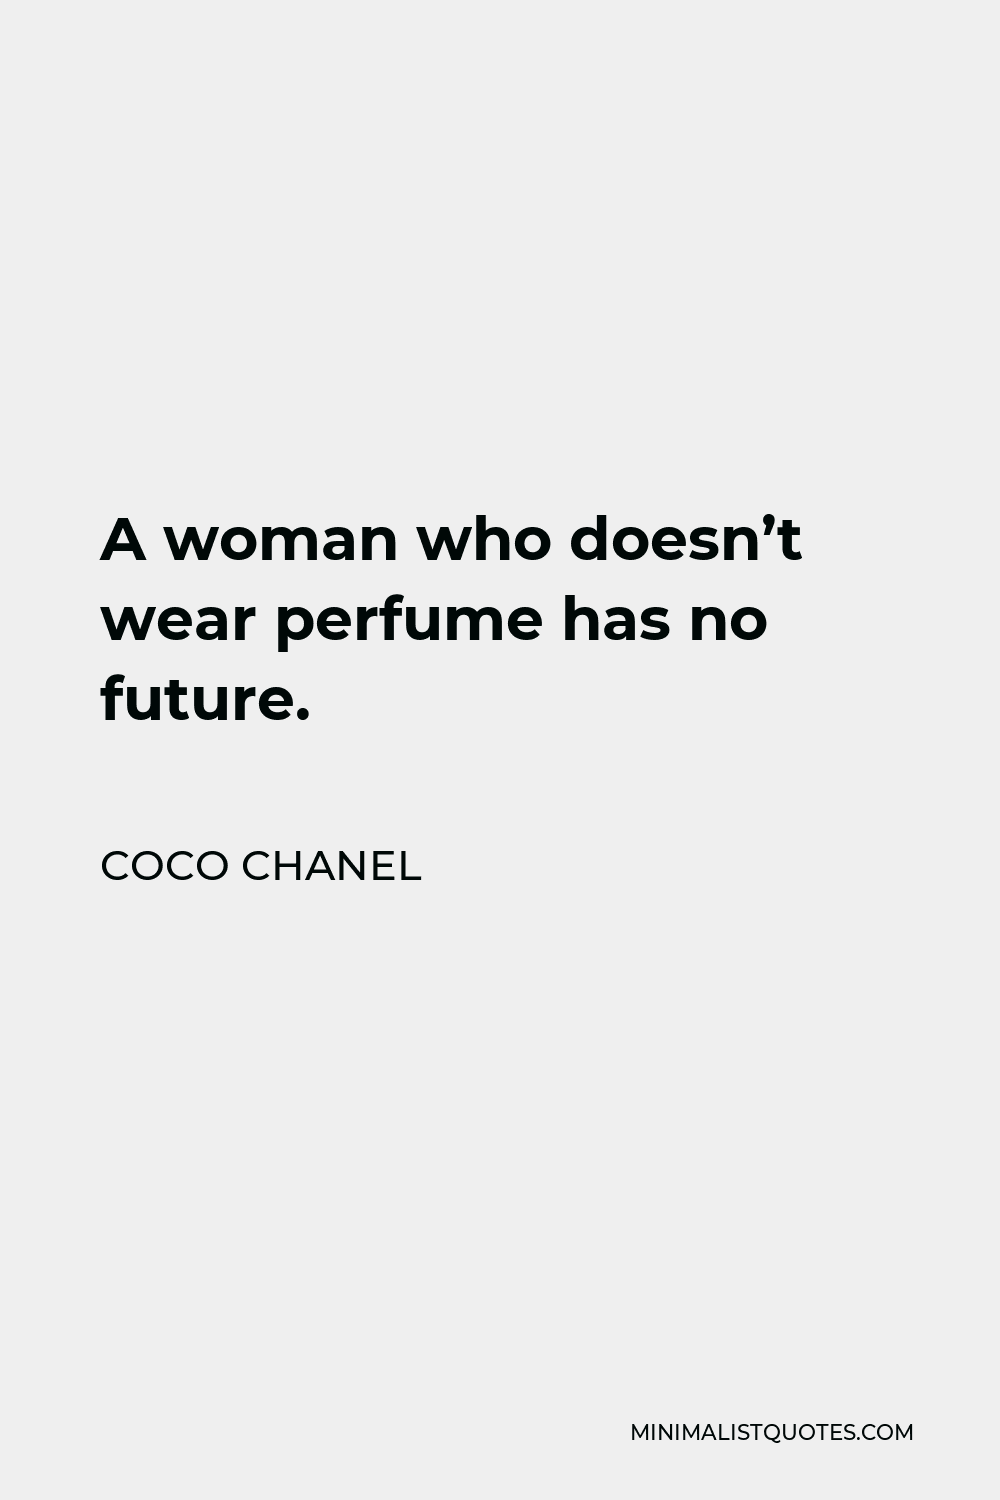 Coco Chanel Quote: A woman who doesn't wear perfume has no future.